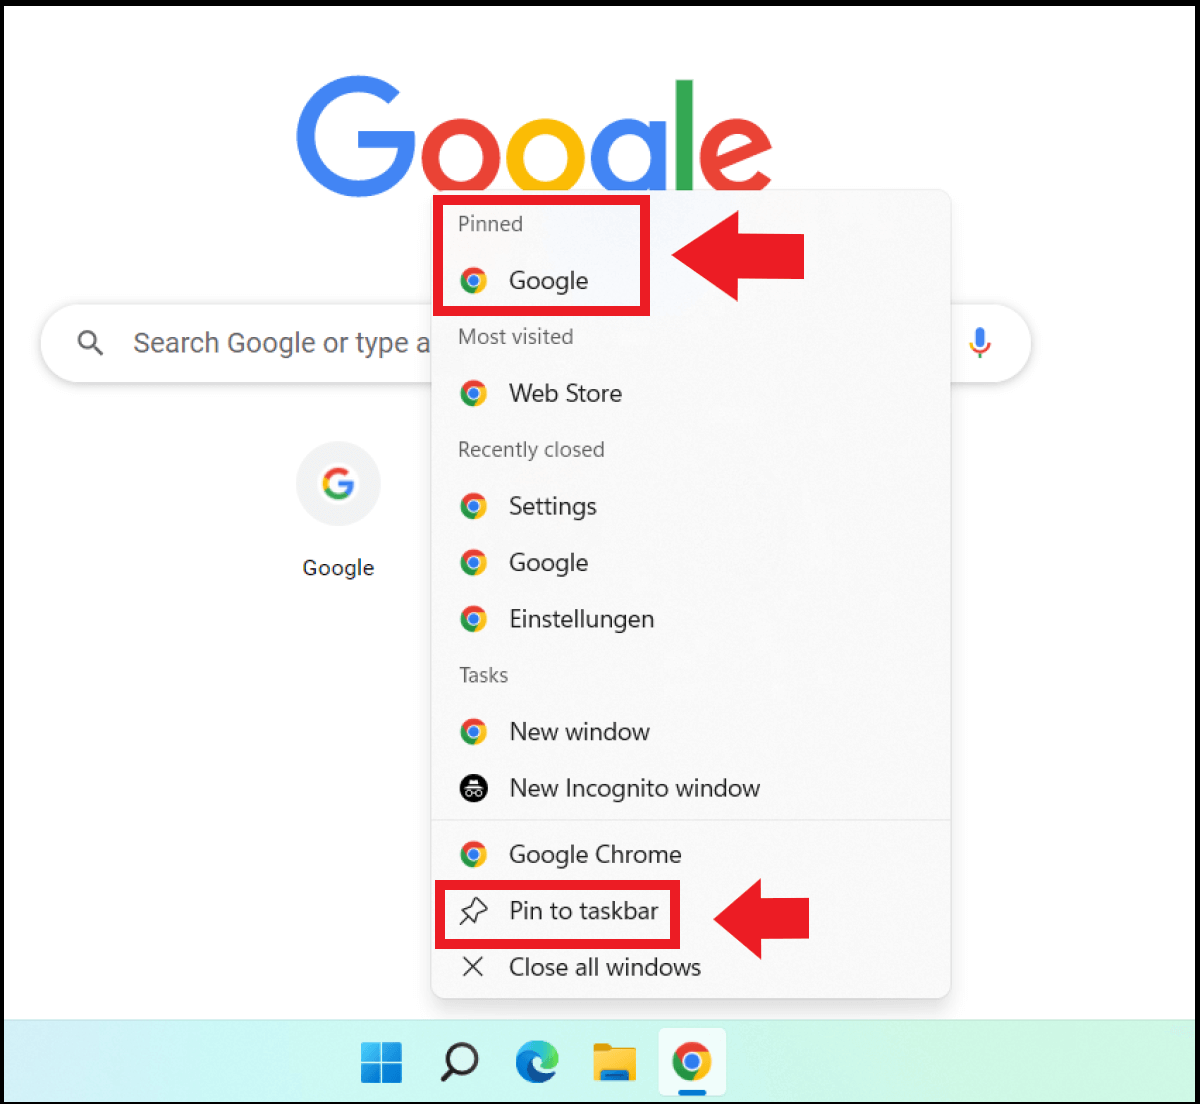 Pinned web links in the taskbar’s browser icon